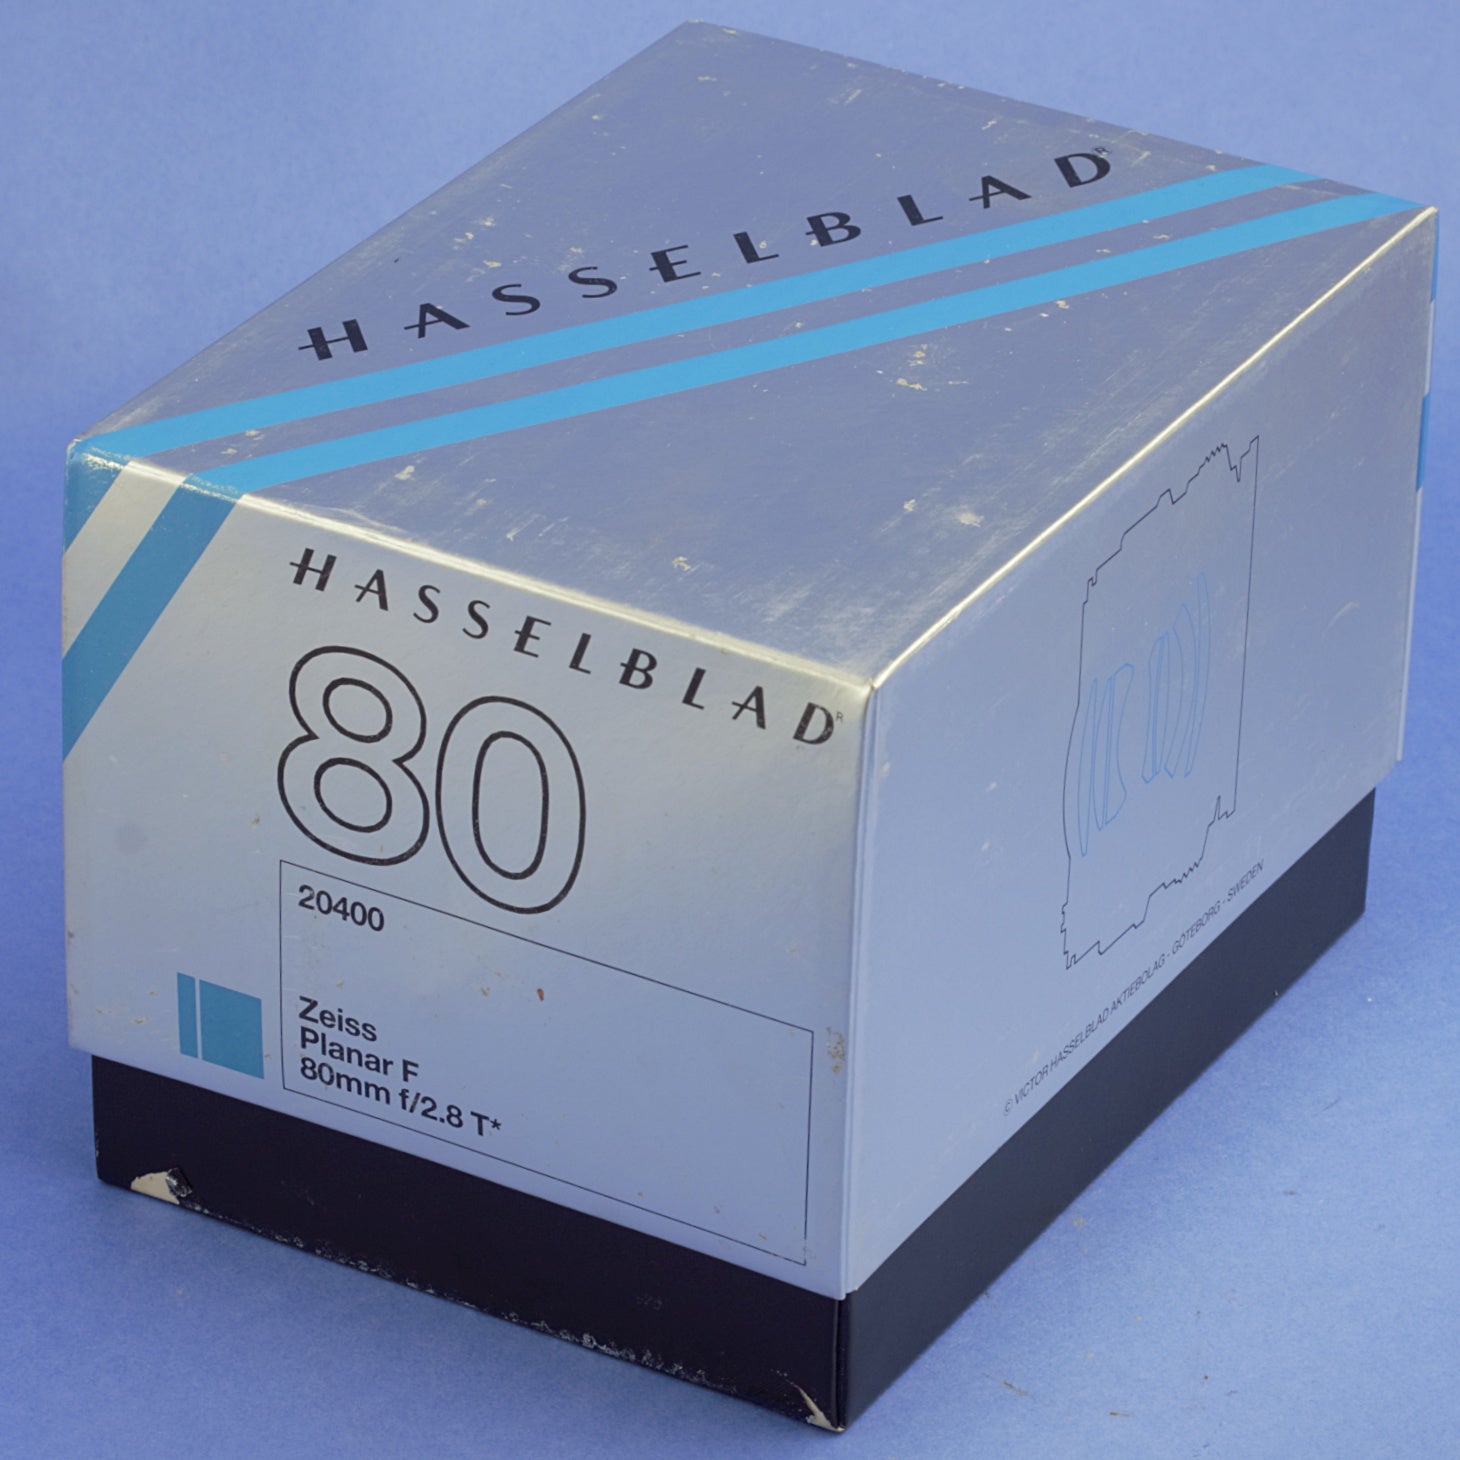 Hasselblad Planar 80mm 2.8 F Lens for 200 Series Near Mint Condition